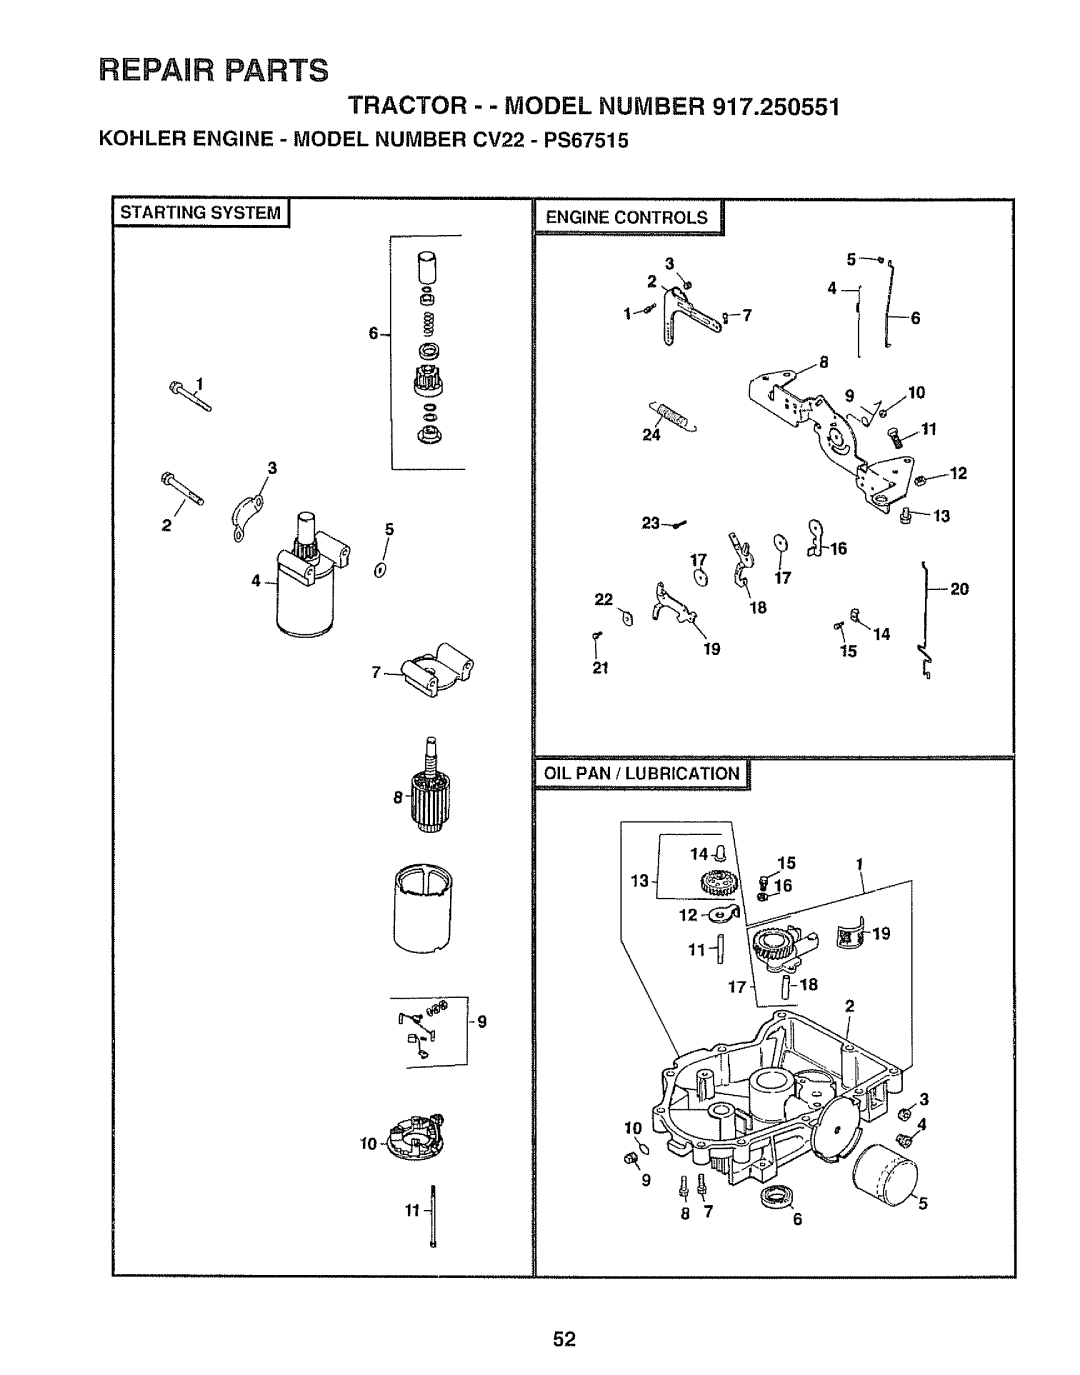 Sears 917.250551 manual STARTING SYSTEM 3, 3 25, 1_7 _j--16, Repaur Parts, Tractor - - Model Number 